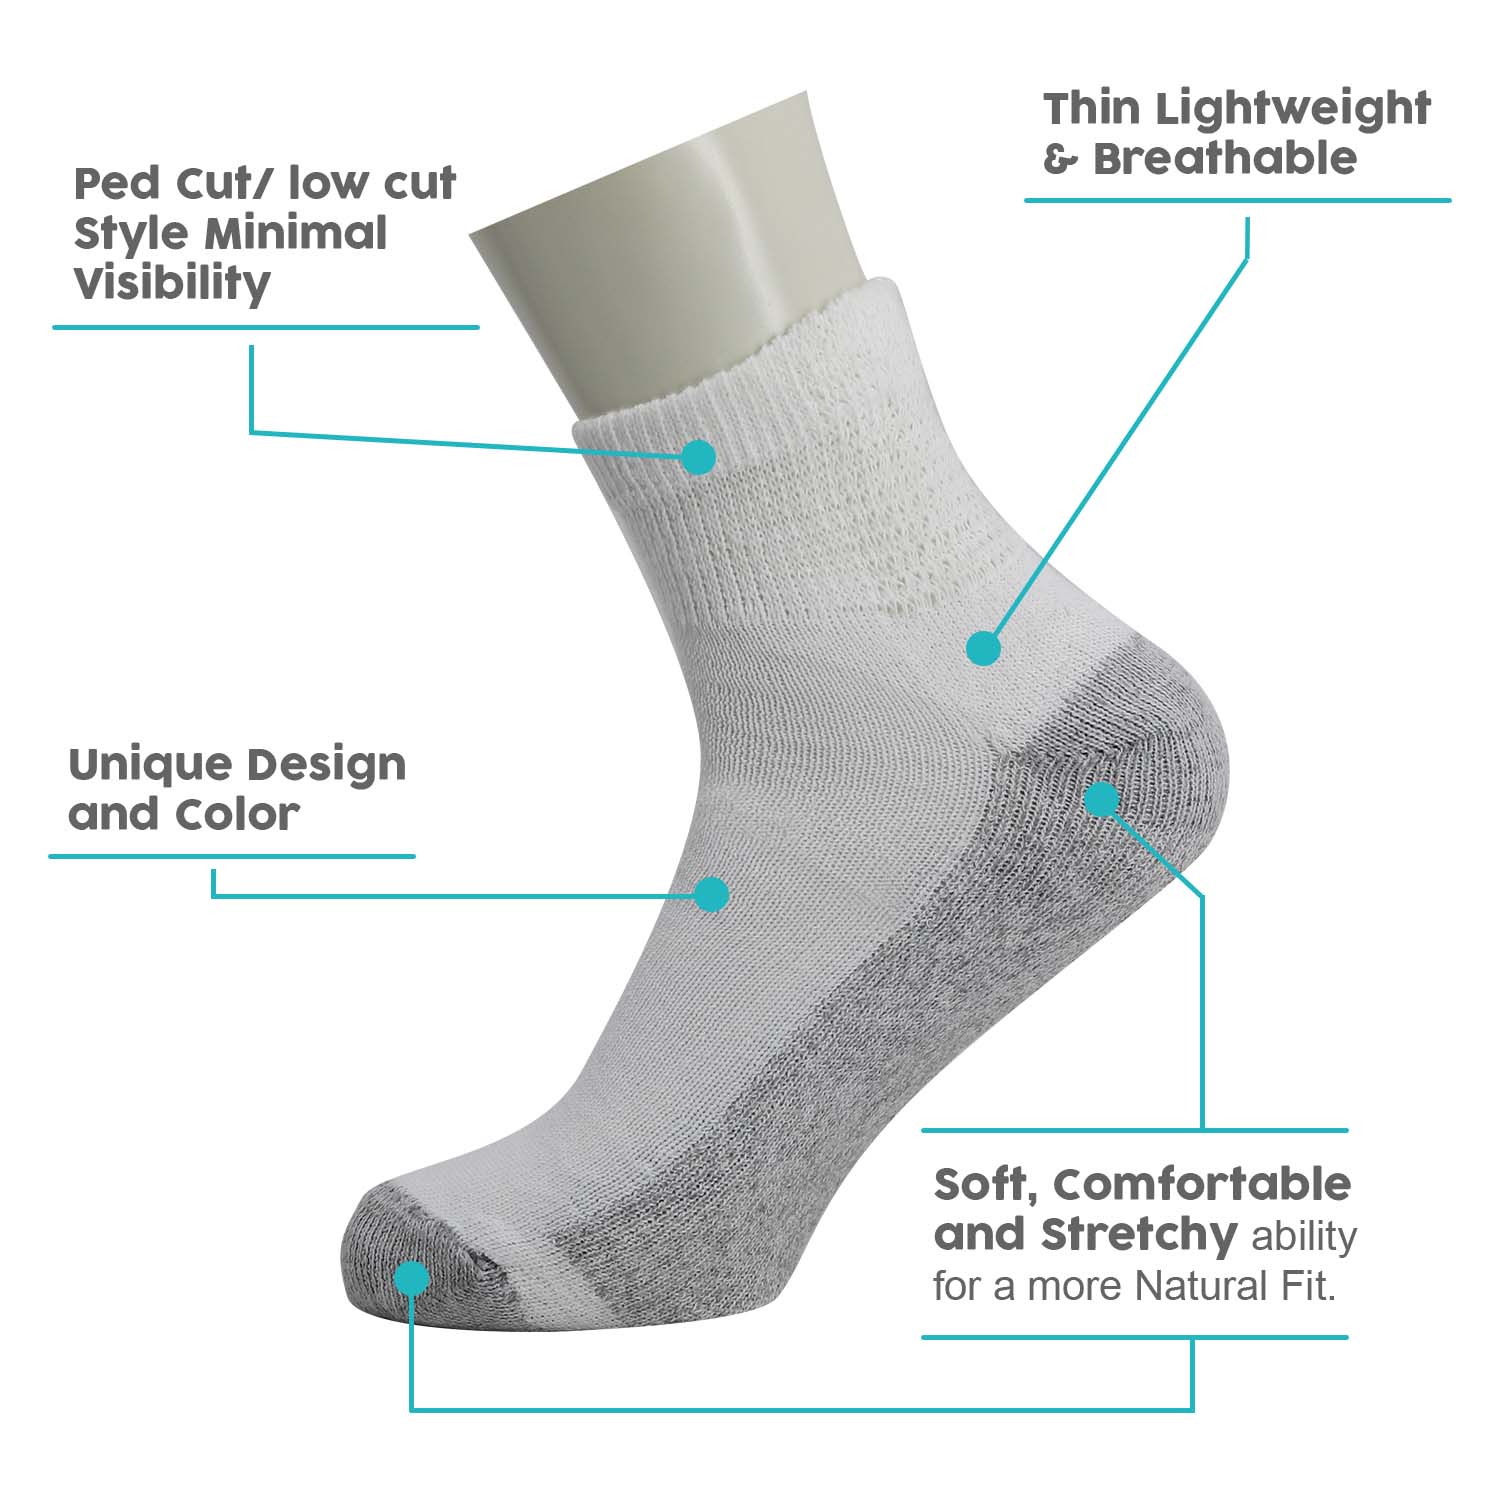 Men's Ankle Wholesale Socks, Size 10-13 In White With Grey - Bulk Case Of 120 Pairs